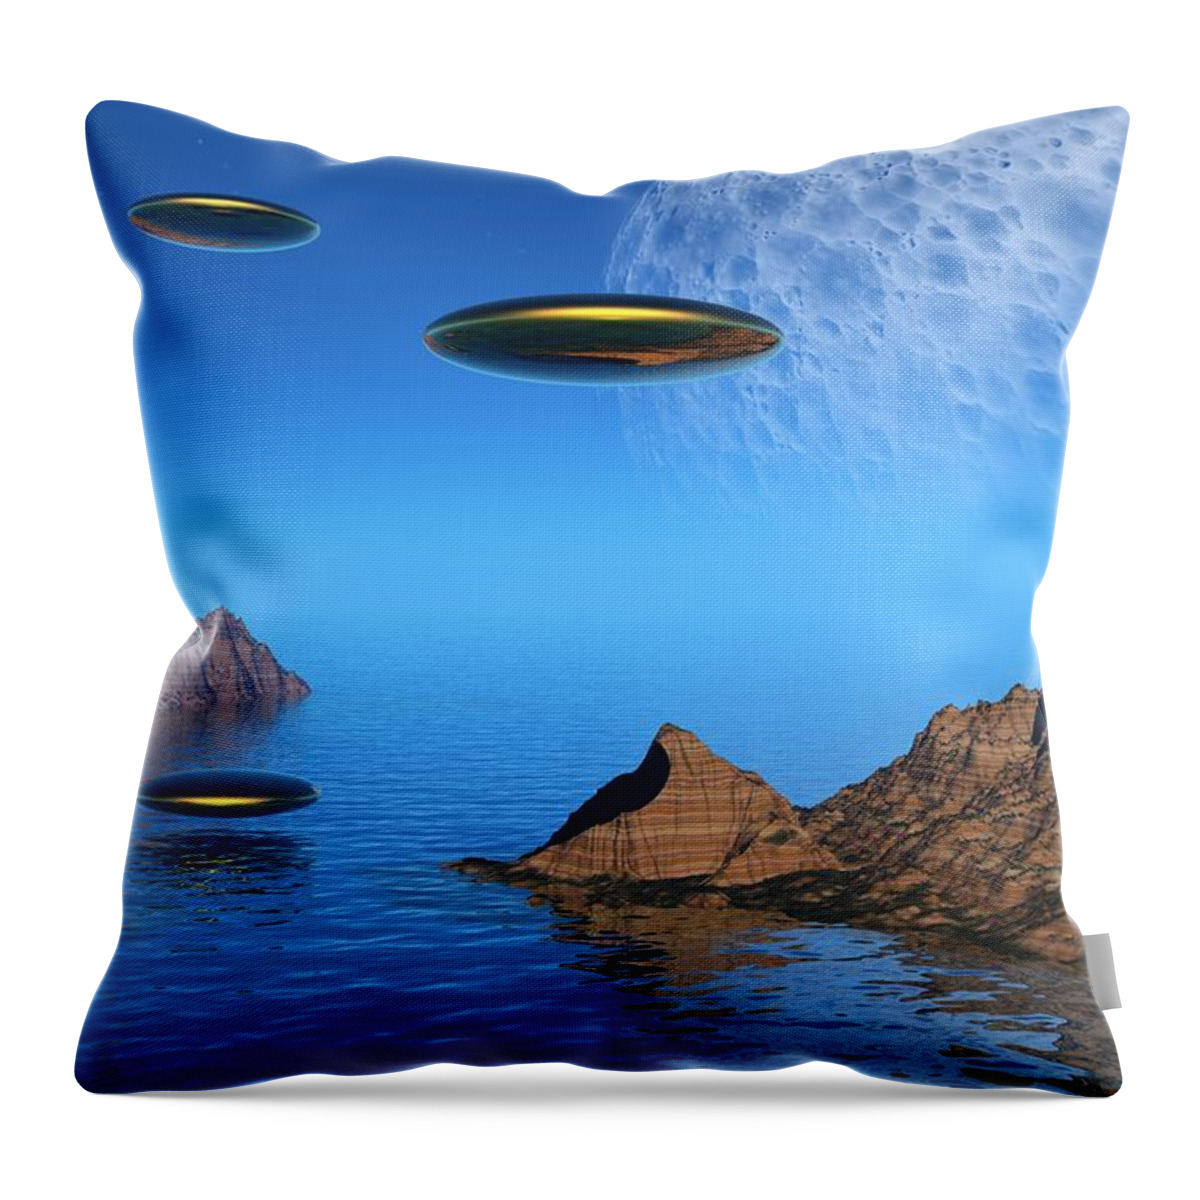 Moon Throw Pillow featuring the digital art A Great Day For Flying by Lyle Hatch